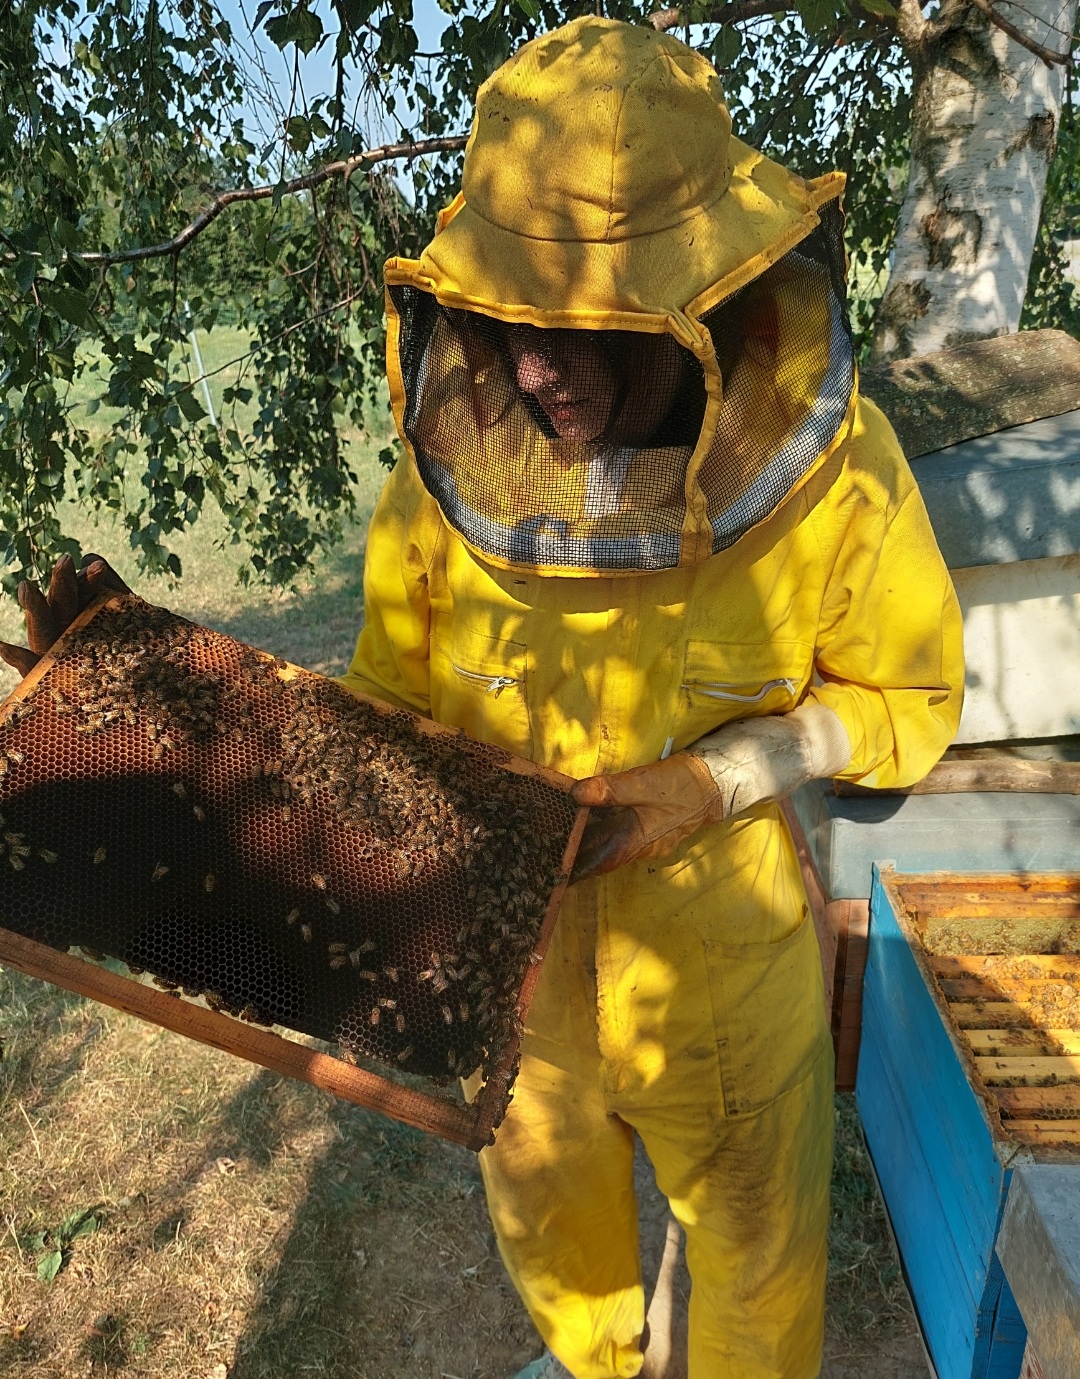 Bee-Day, put on your beekeeping suit and discover the world of bees